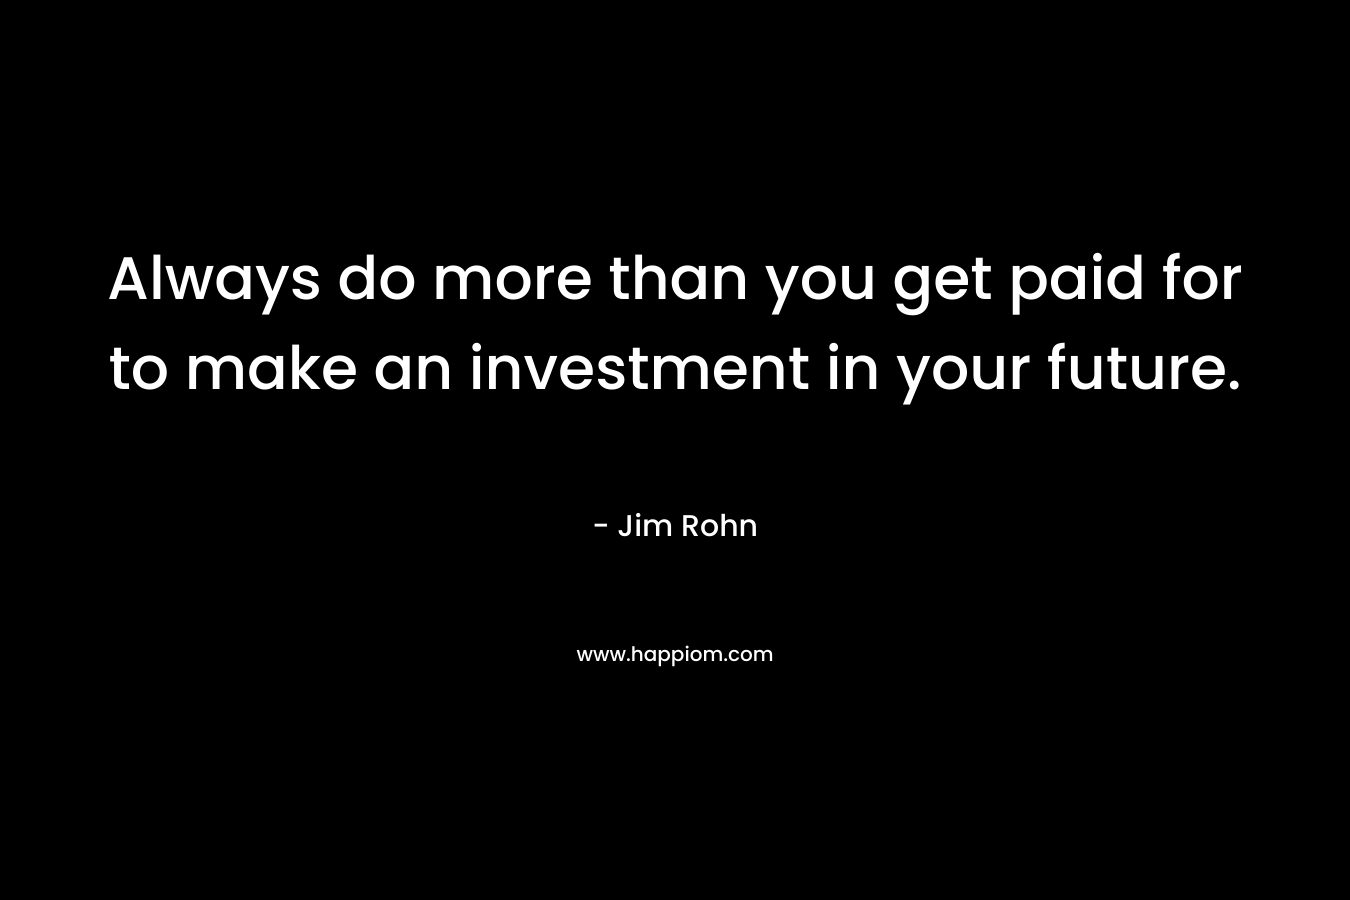 Always do more than you get paid for to make an investment in your future.